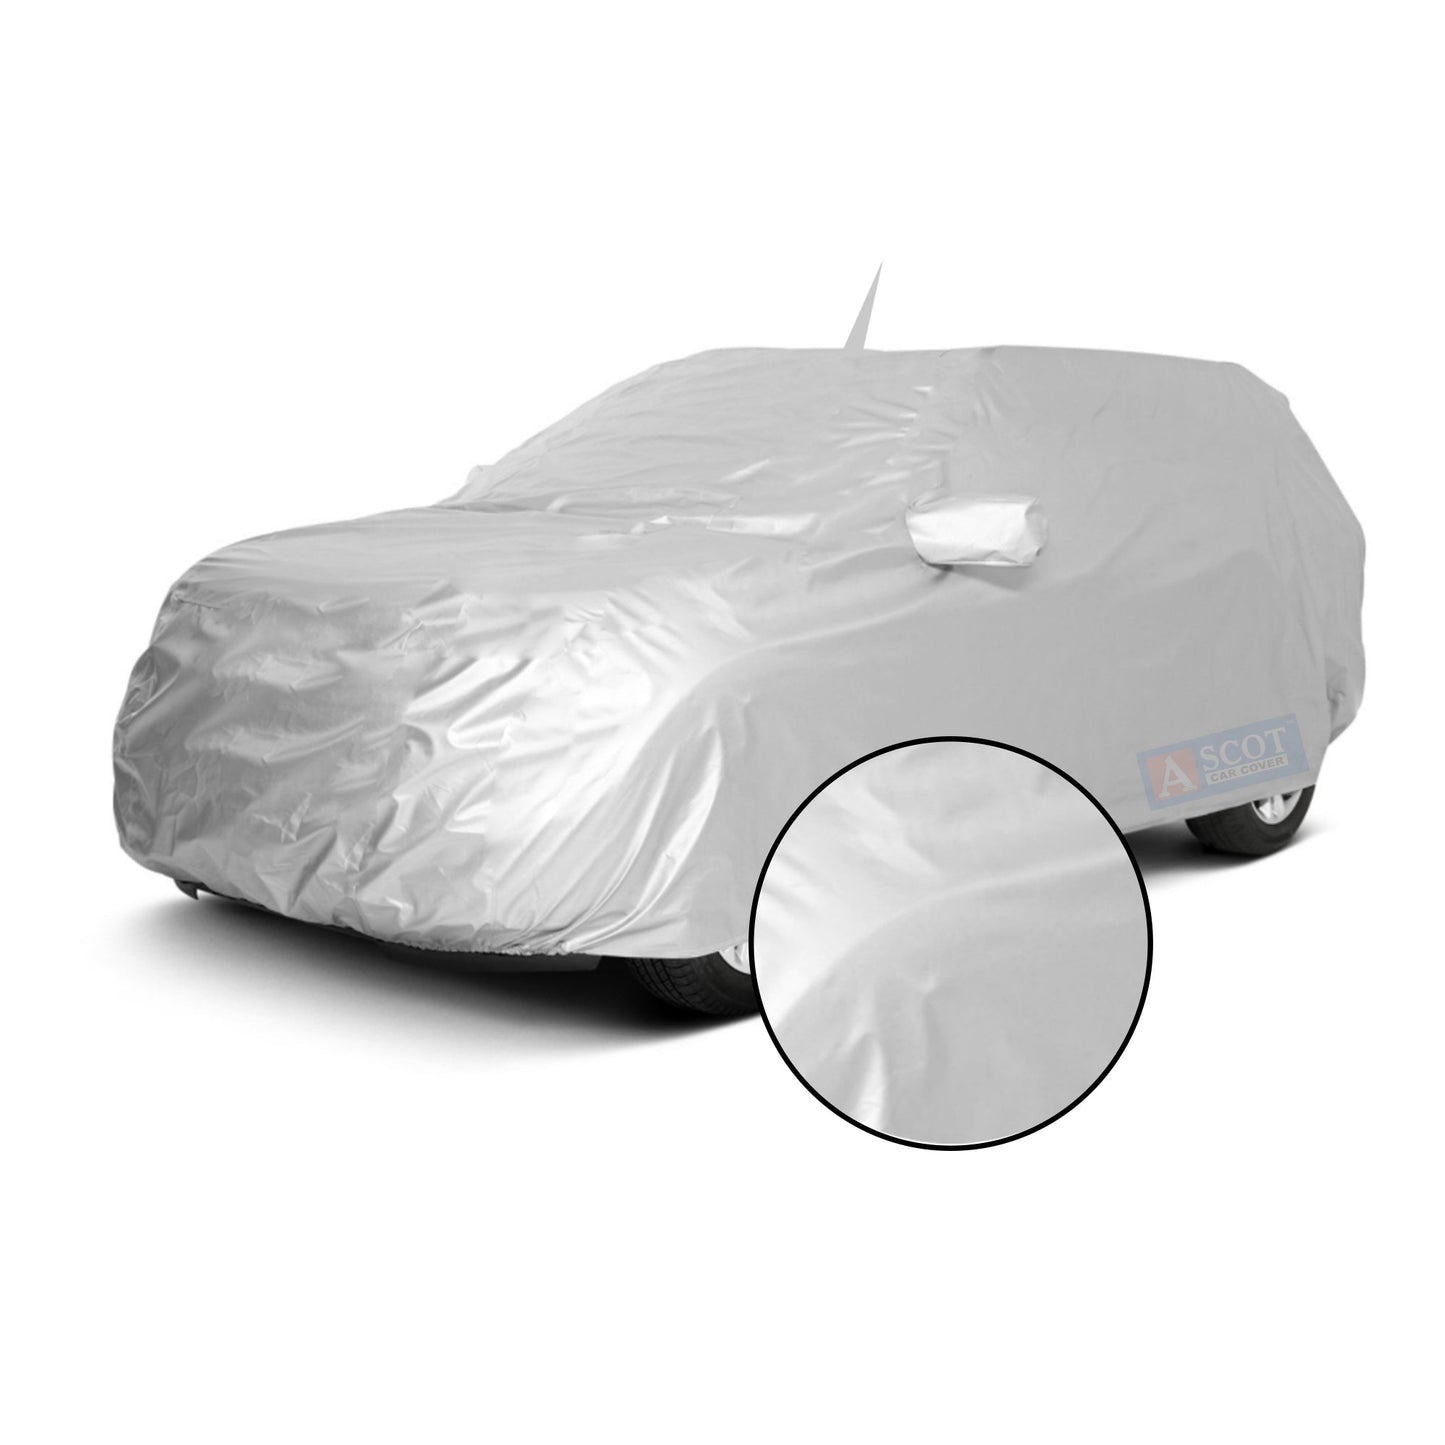 Ascot Kia Carnival Car Body Cover Dust Proof, Trippel Stitched